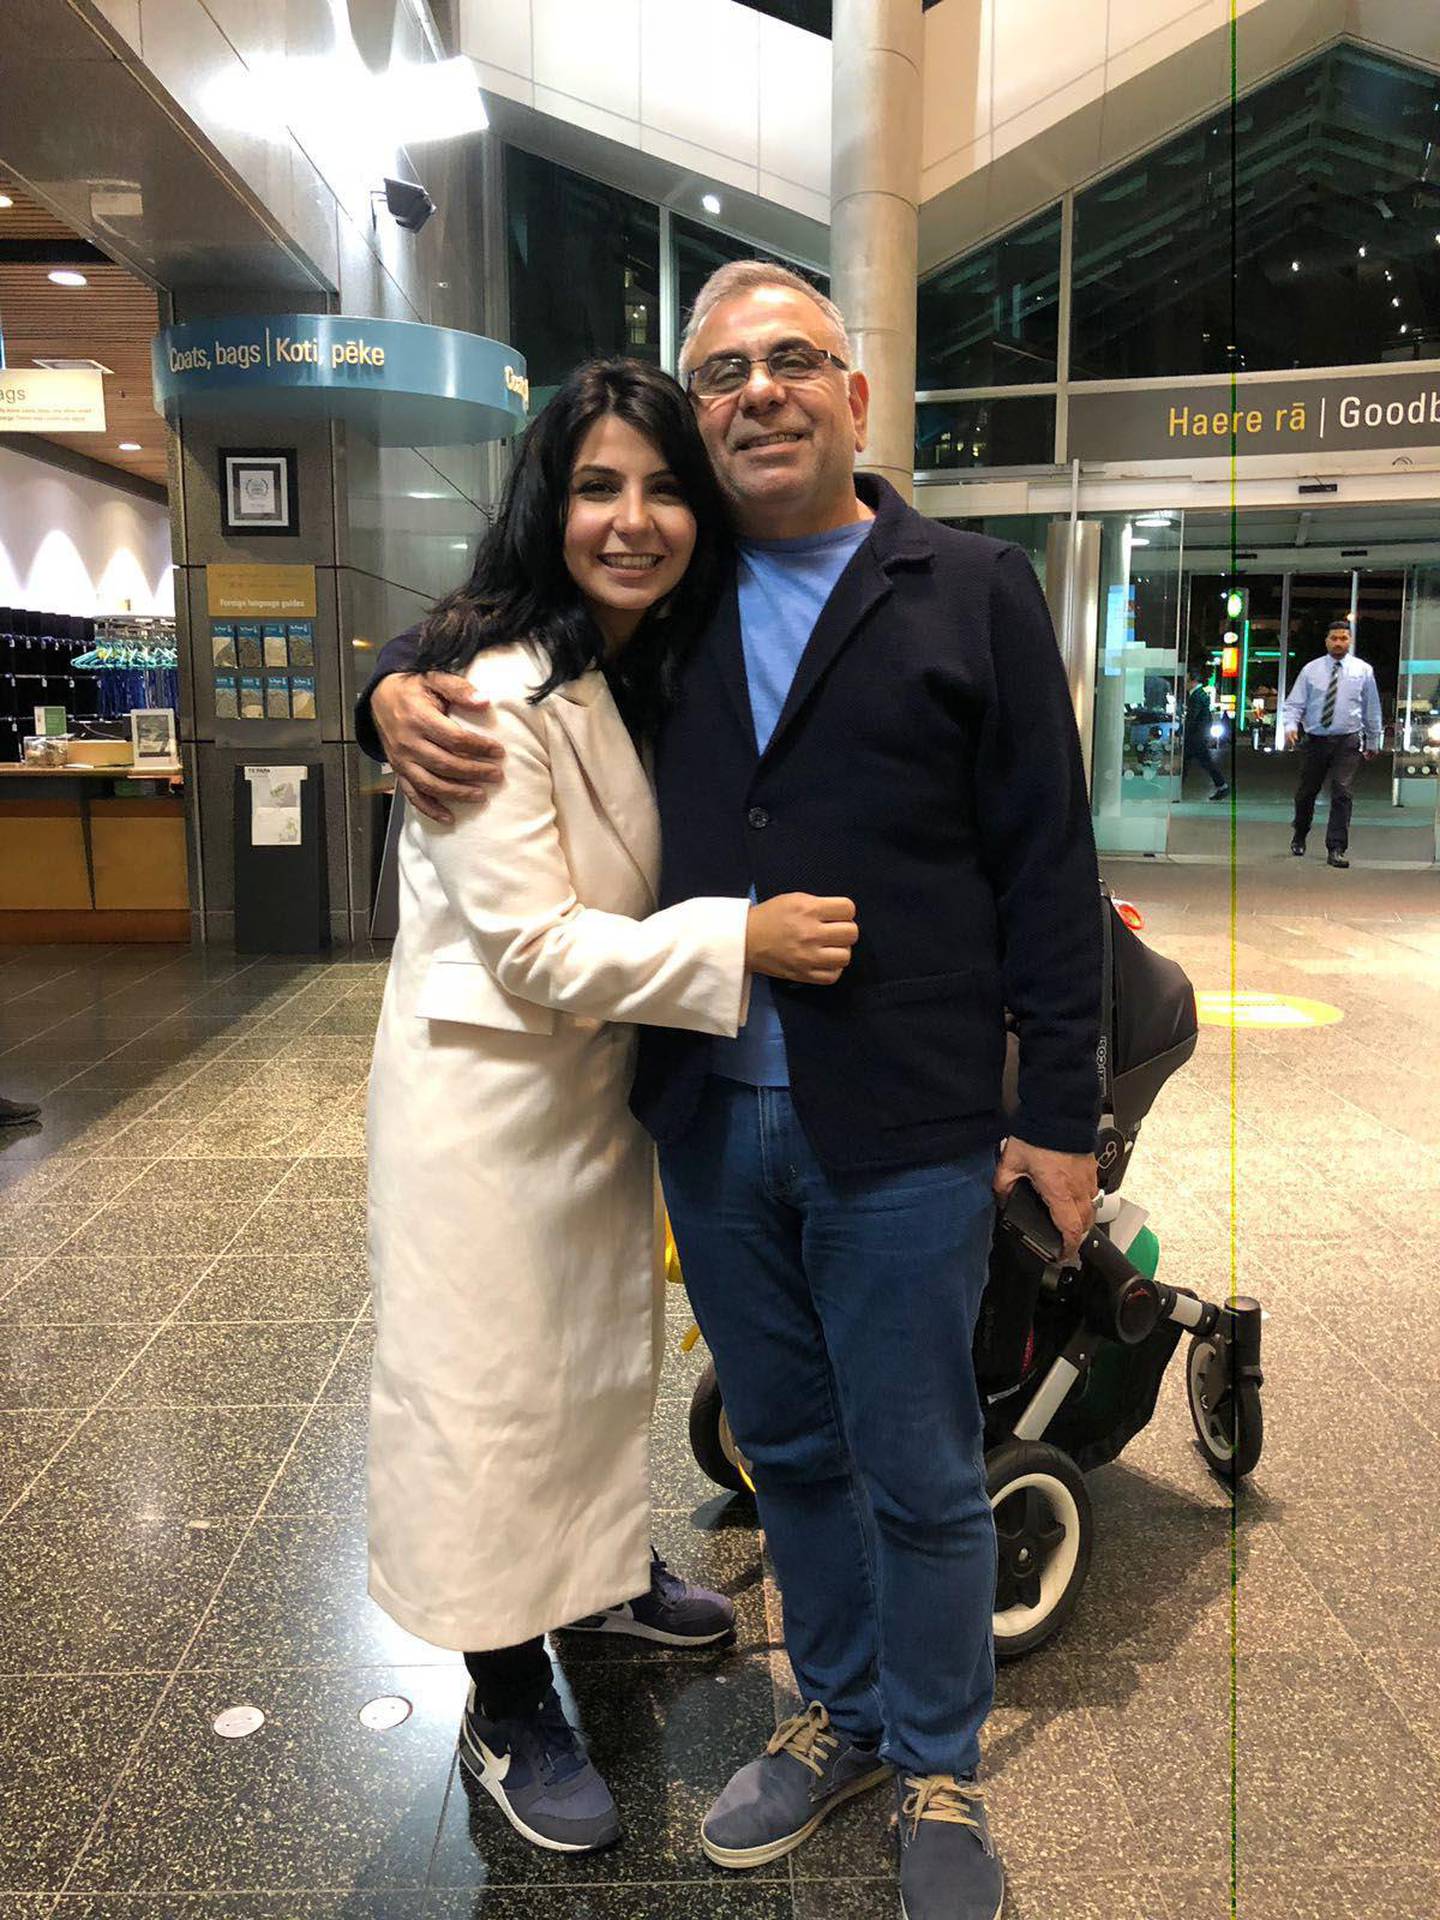 Heba Adeeb's father was shot in the back after covering her brothers inside Noor mosque in Christchurch, New Zealand as a terror attack unfolded with a gunman killing 49 people.